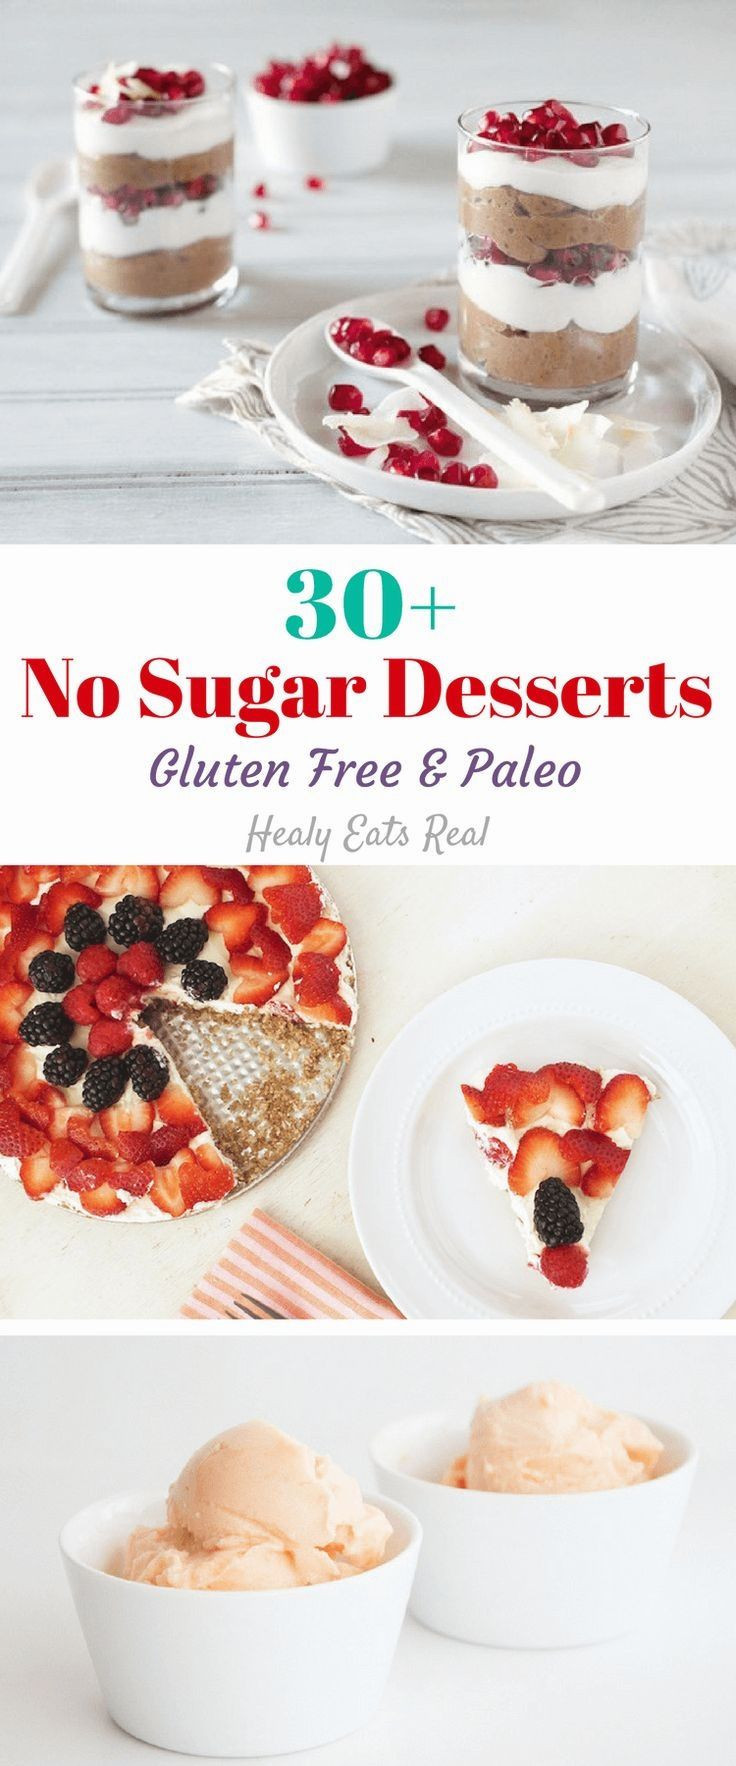 Sugar Free Desserts Without Artificial Sweeteners
 The Best Low Sugar Desserts without Artificial Sweeteners